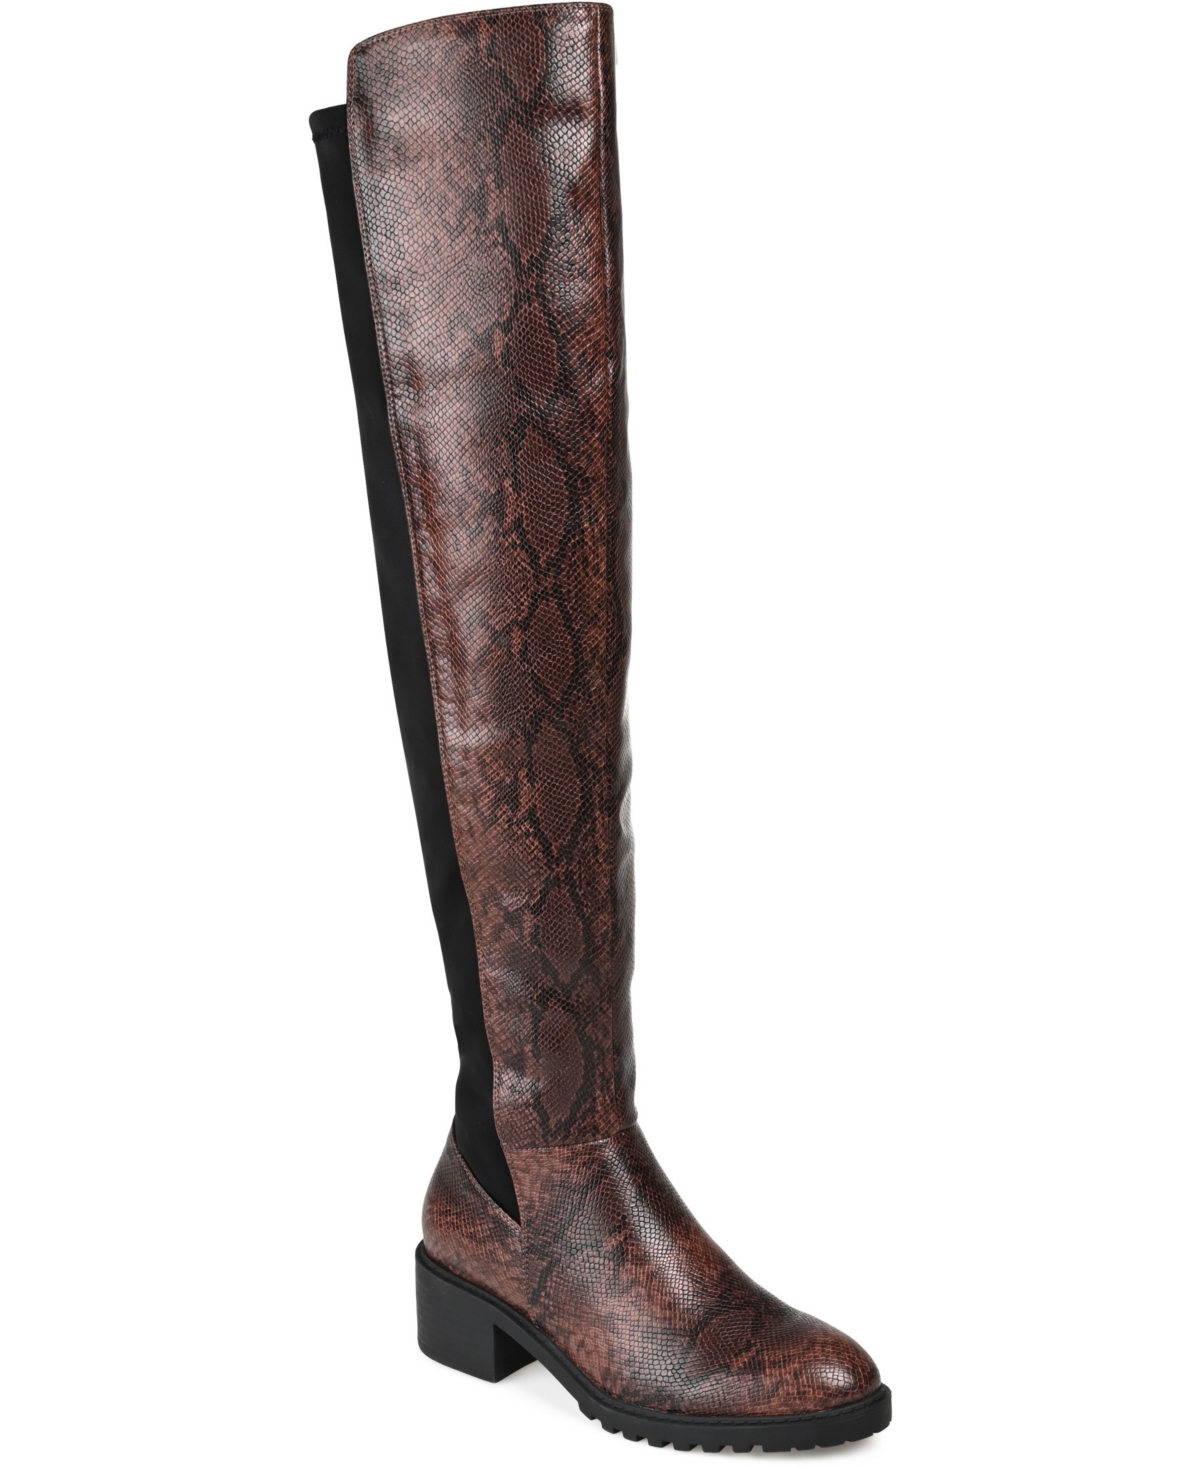 Women's Aryia Wide Calf Boots - Snake